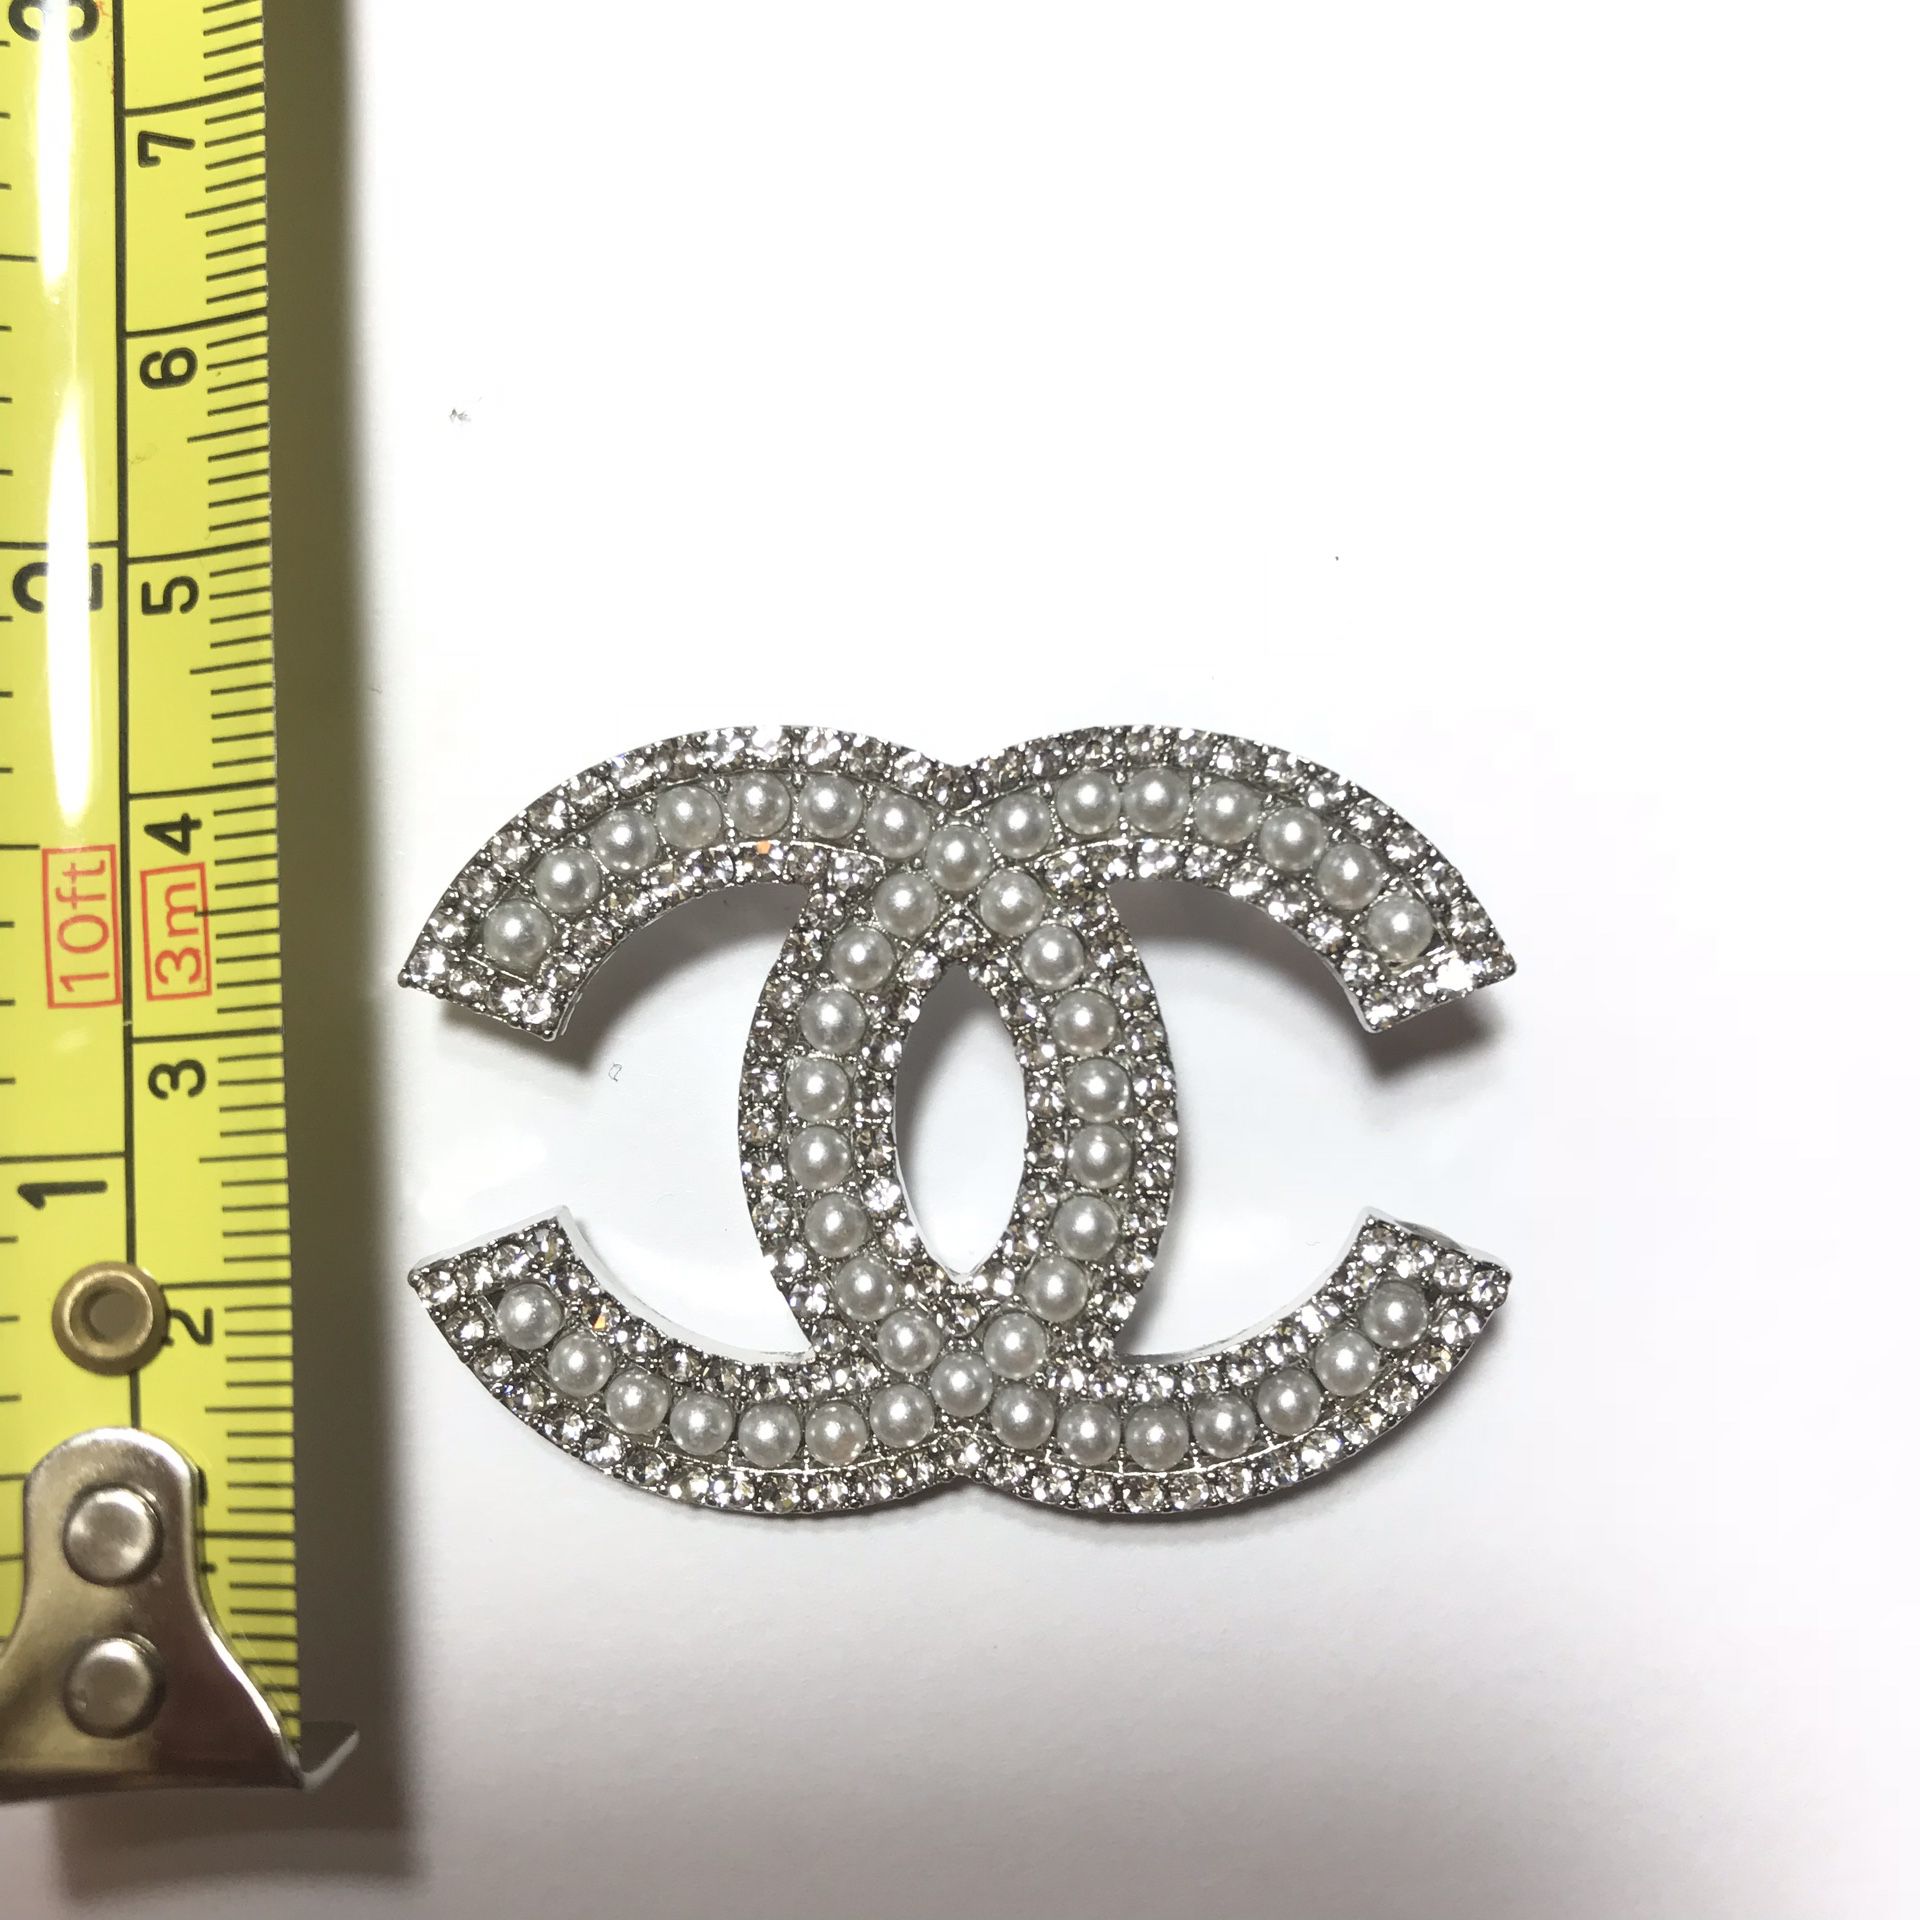 Sold at Auction: Chanel VIP No. 5 Brooch (w/box)